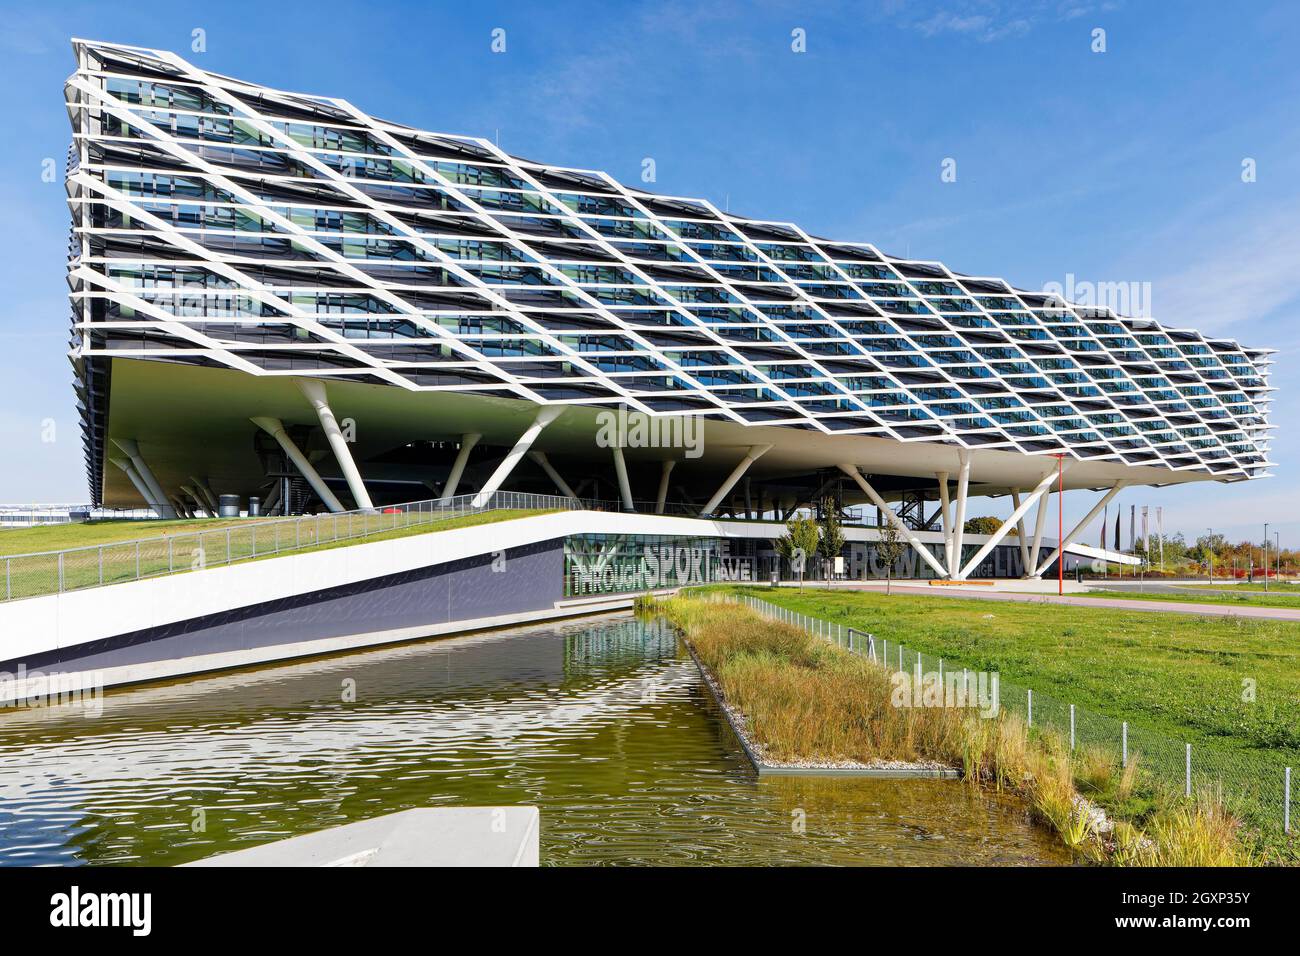 Modernity, architecture, Adidas AG office building, World of Sports Arena,  Through sport we have the power to change lives, Herzogenaurach, Middle  Stock Photo - Alamy